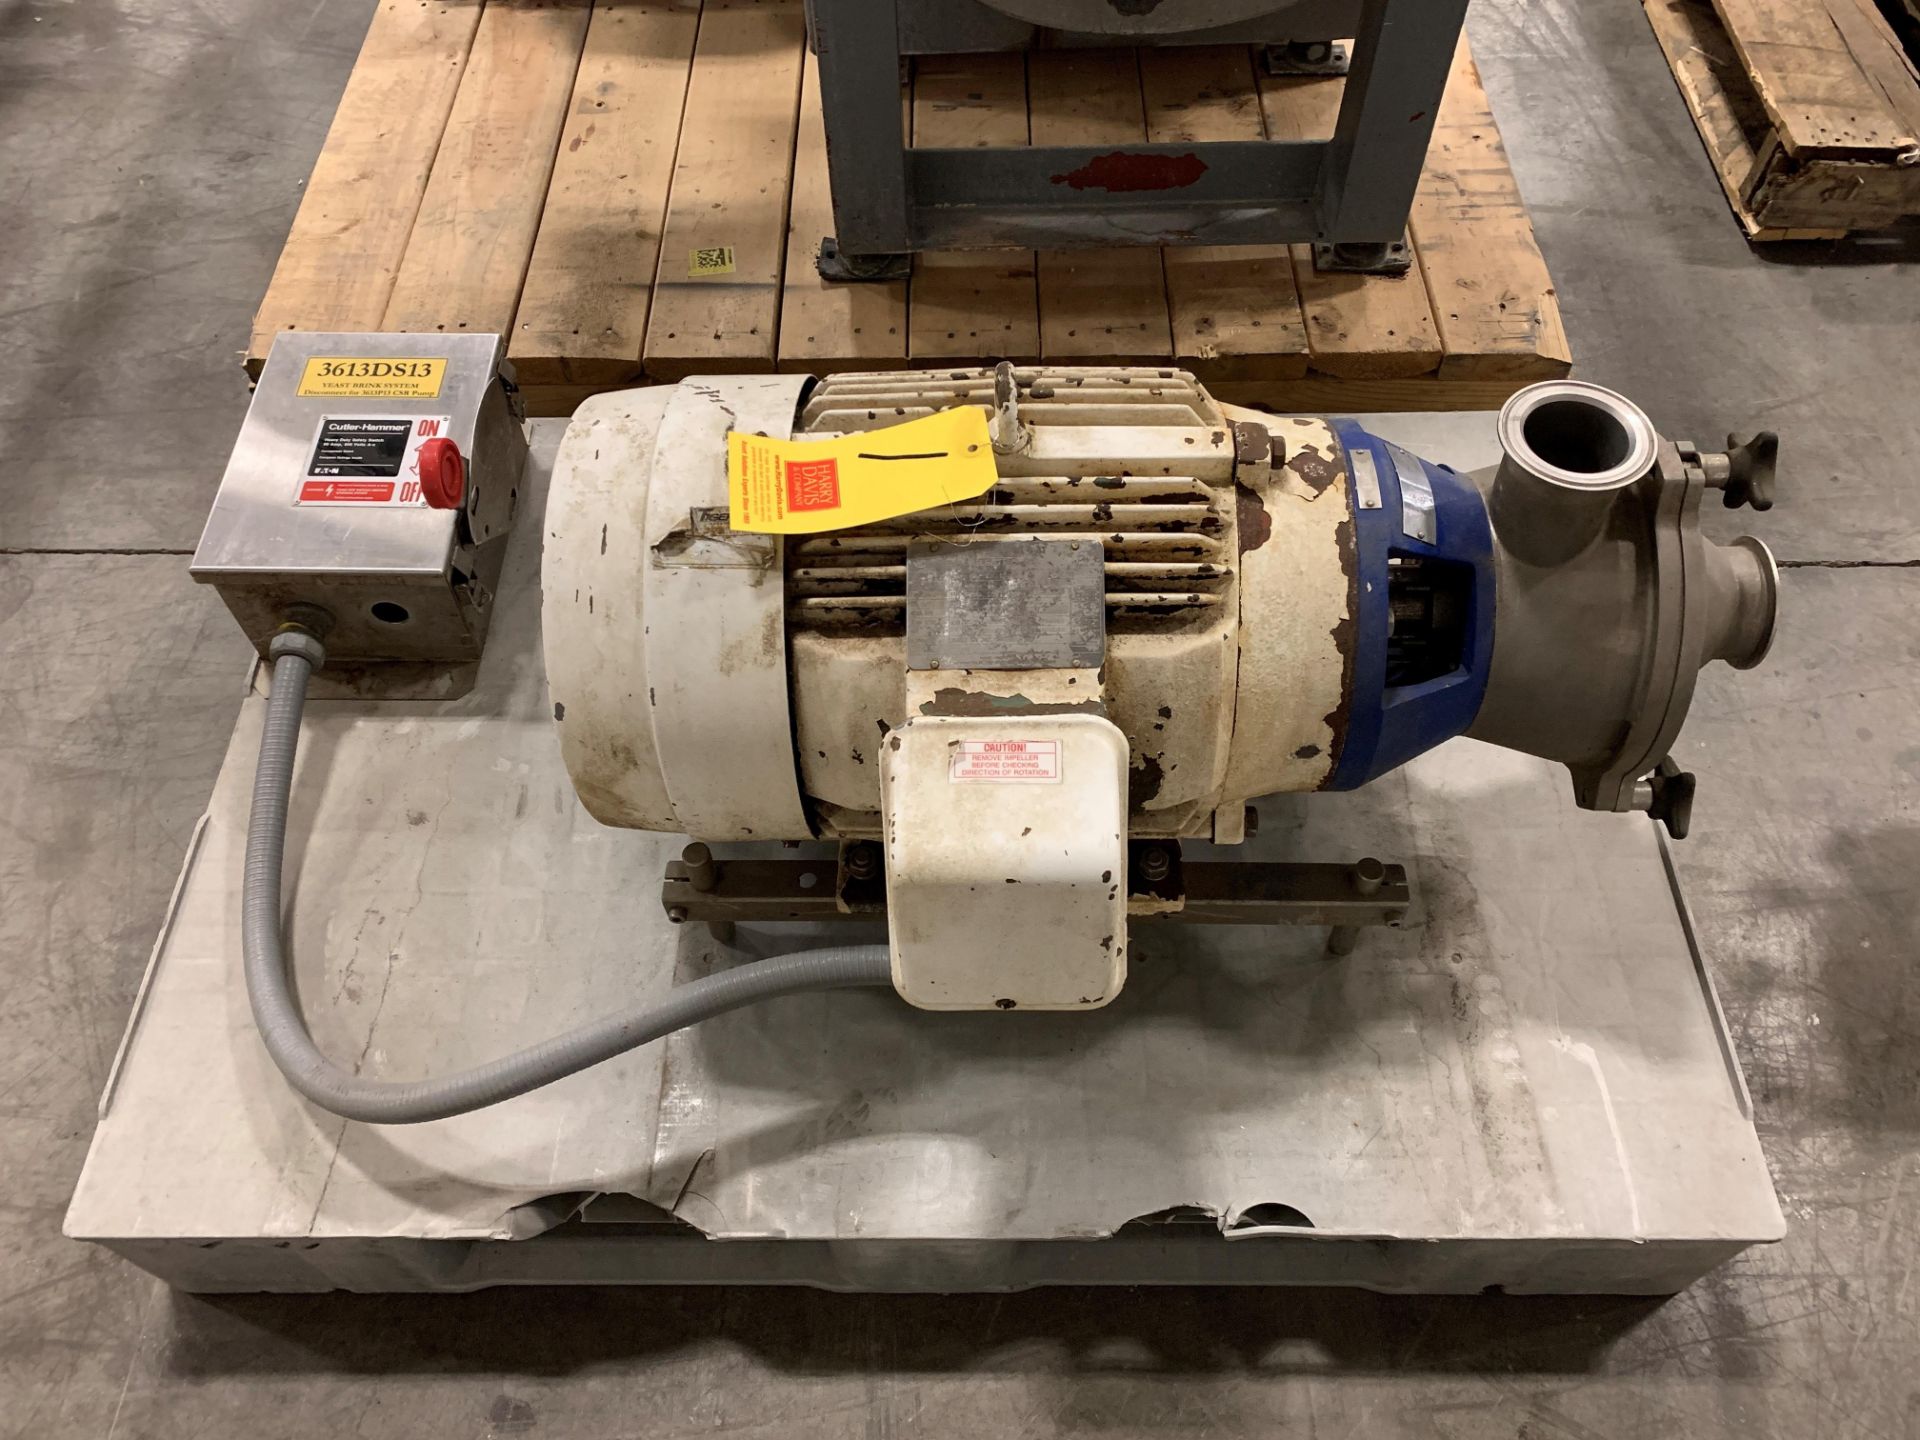 Centrifugal Pump Model: MR-20, With 15 HP Motor, 3" X 3" Head, Clamp Type, And Cutler Hammer S/S - Image 2 of 2